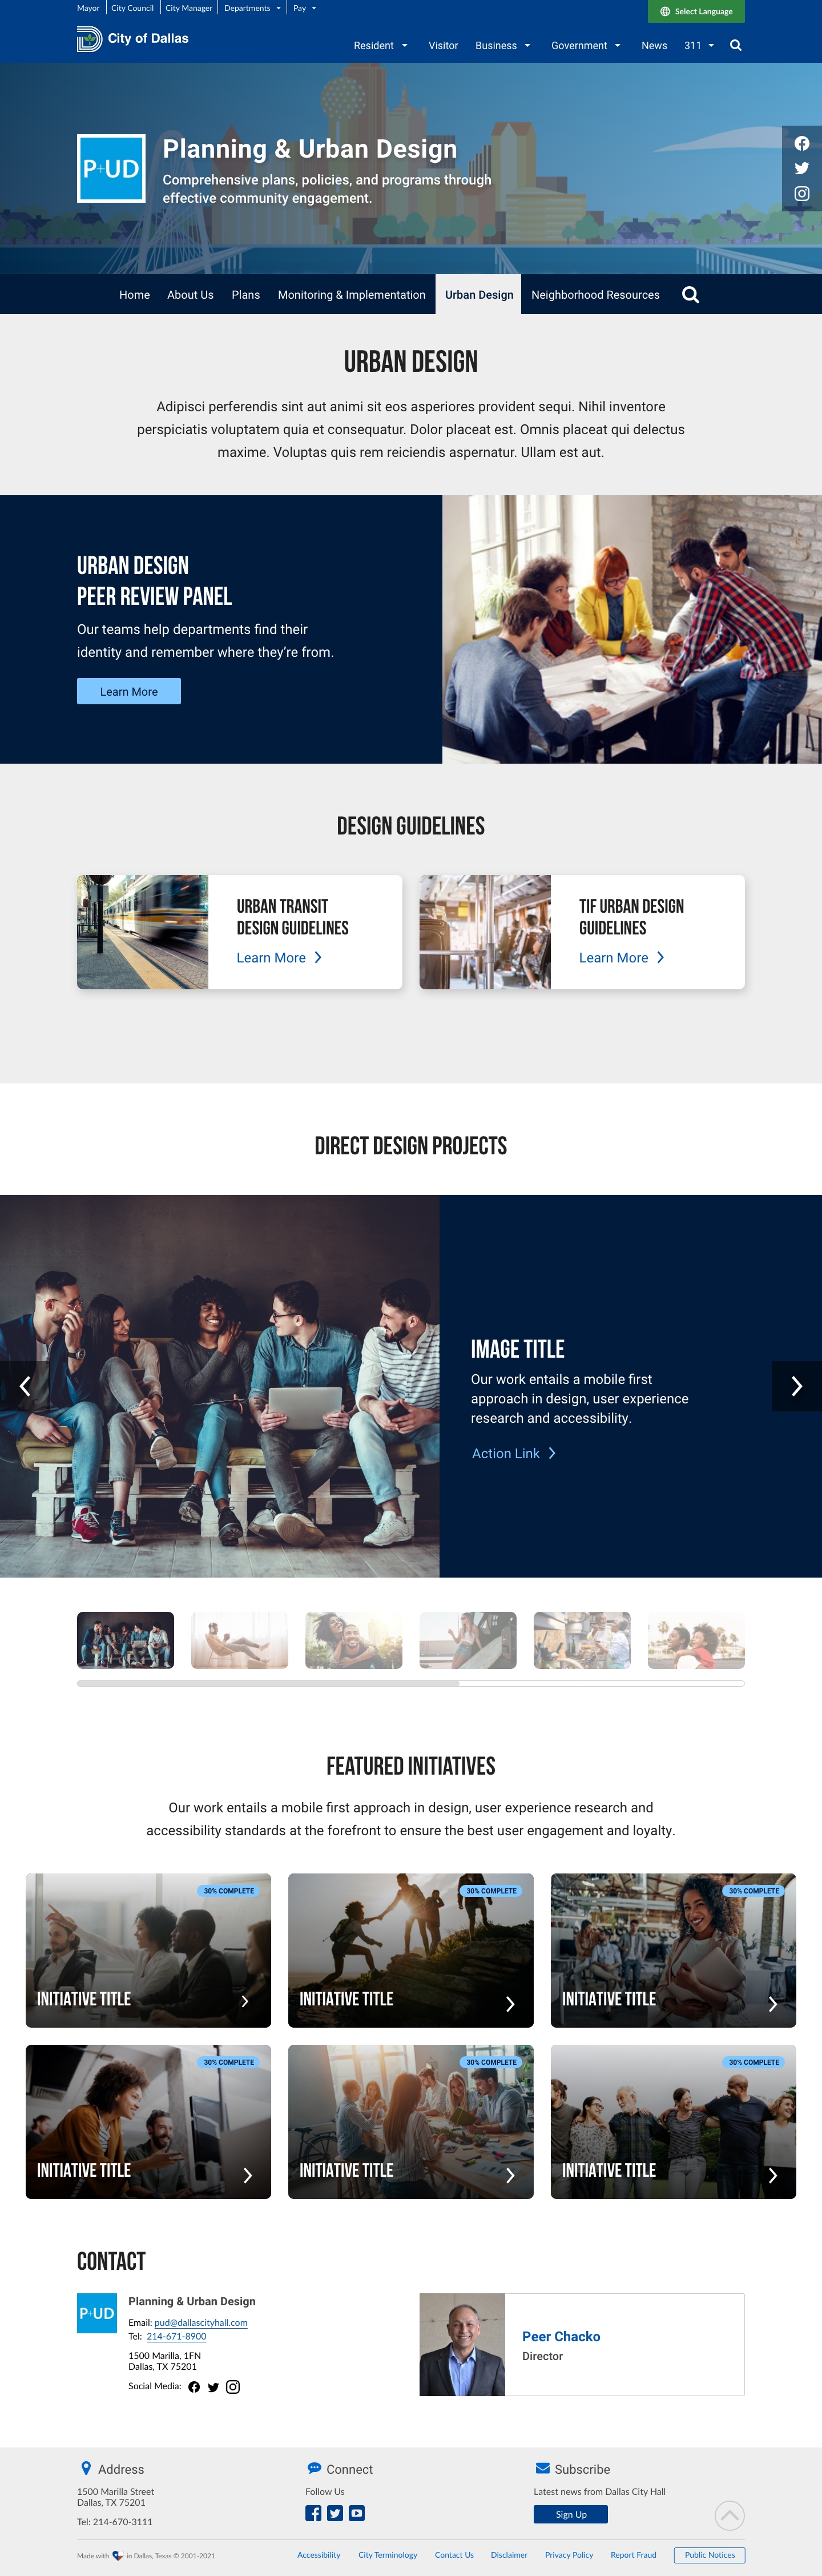 Final mockups of the homepage and about page